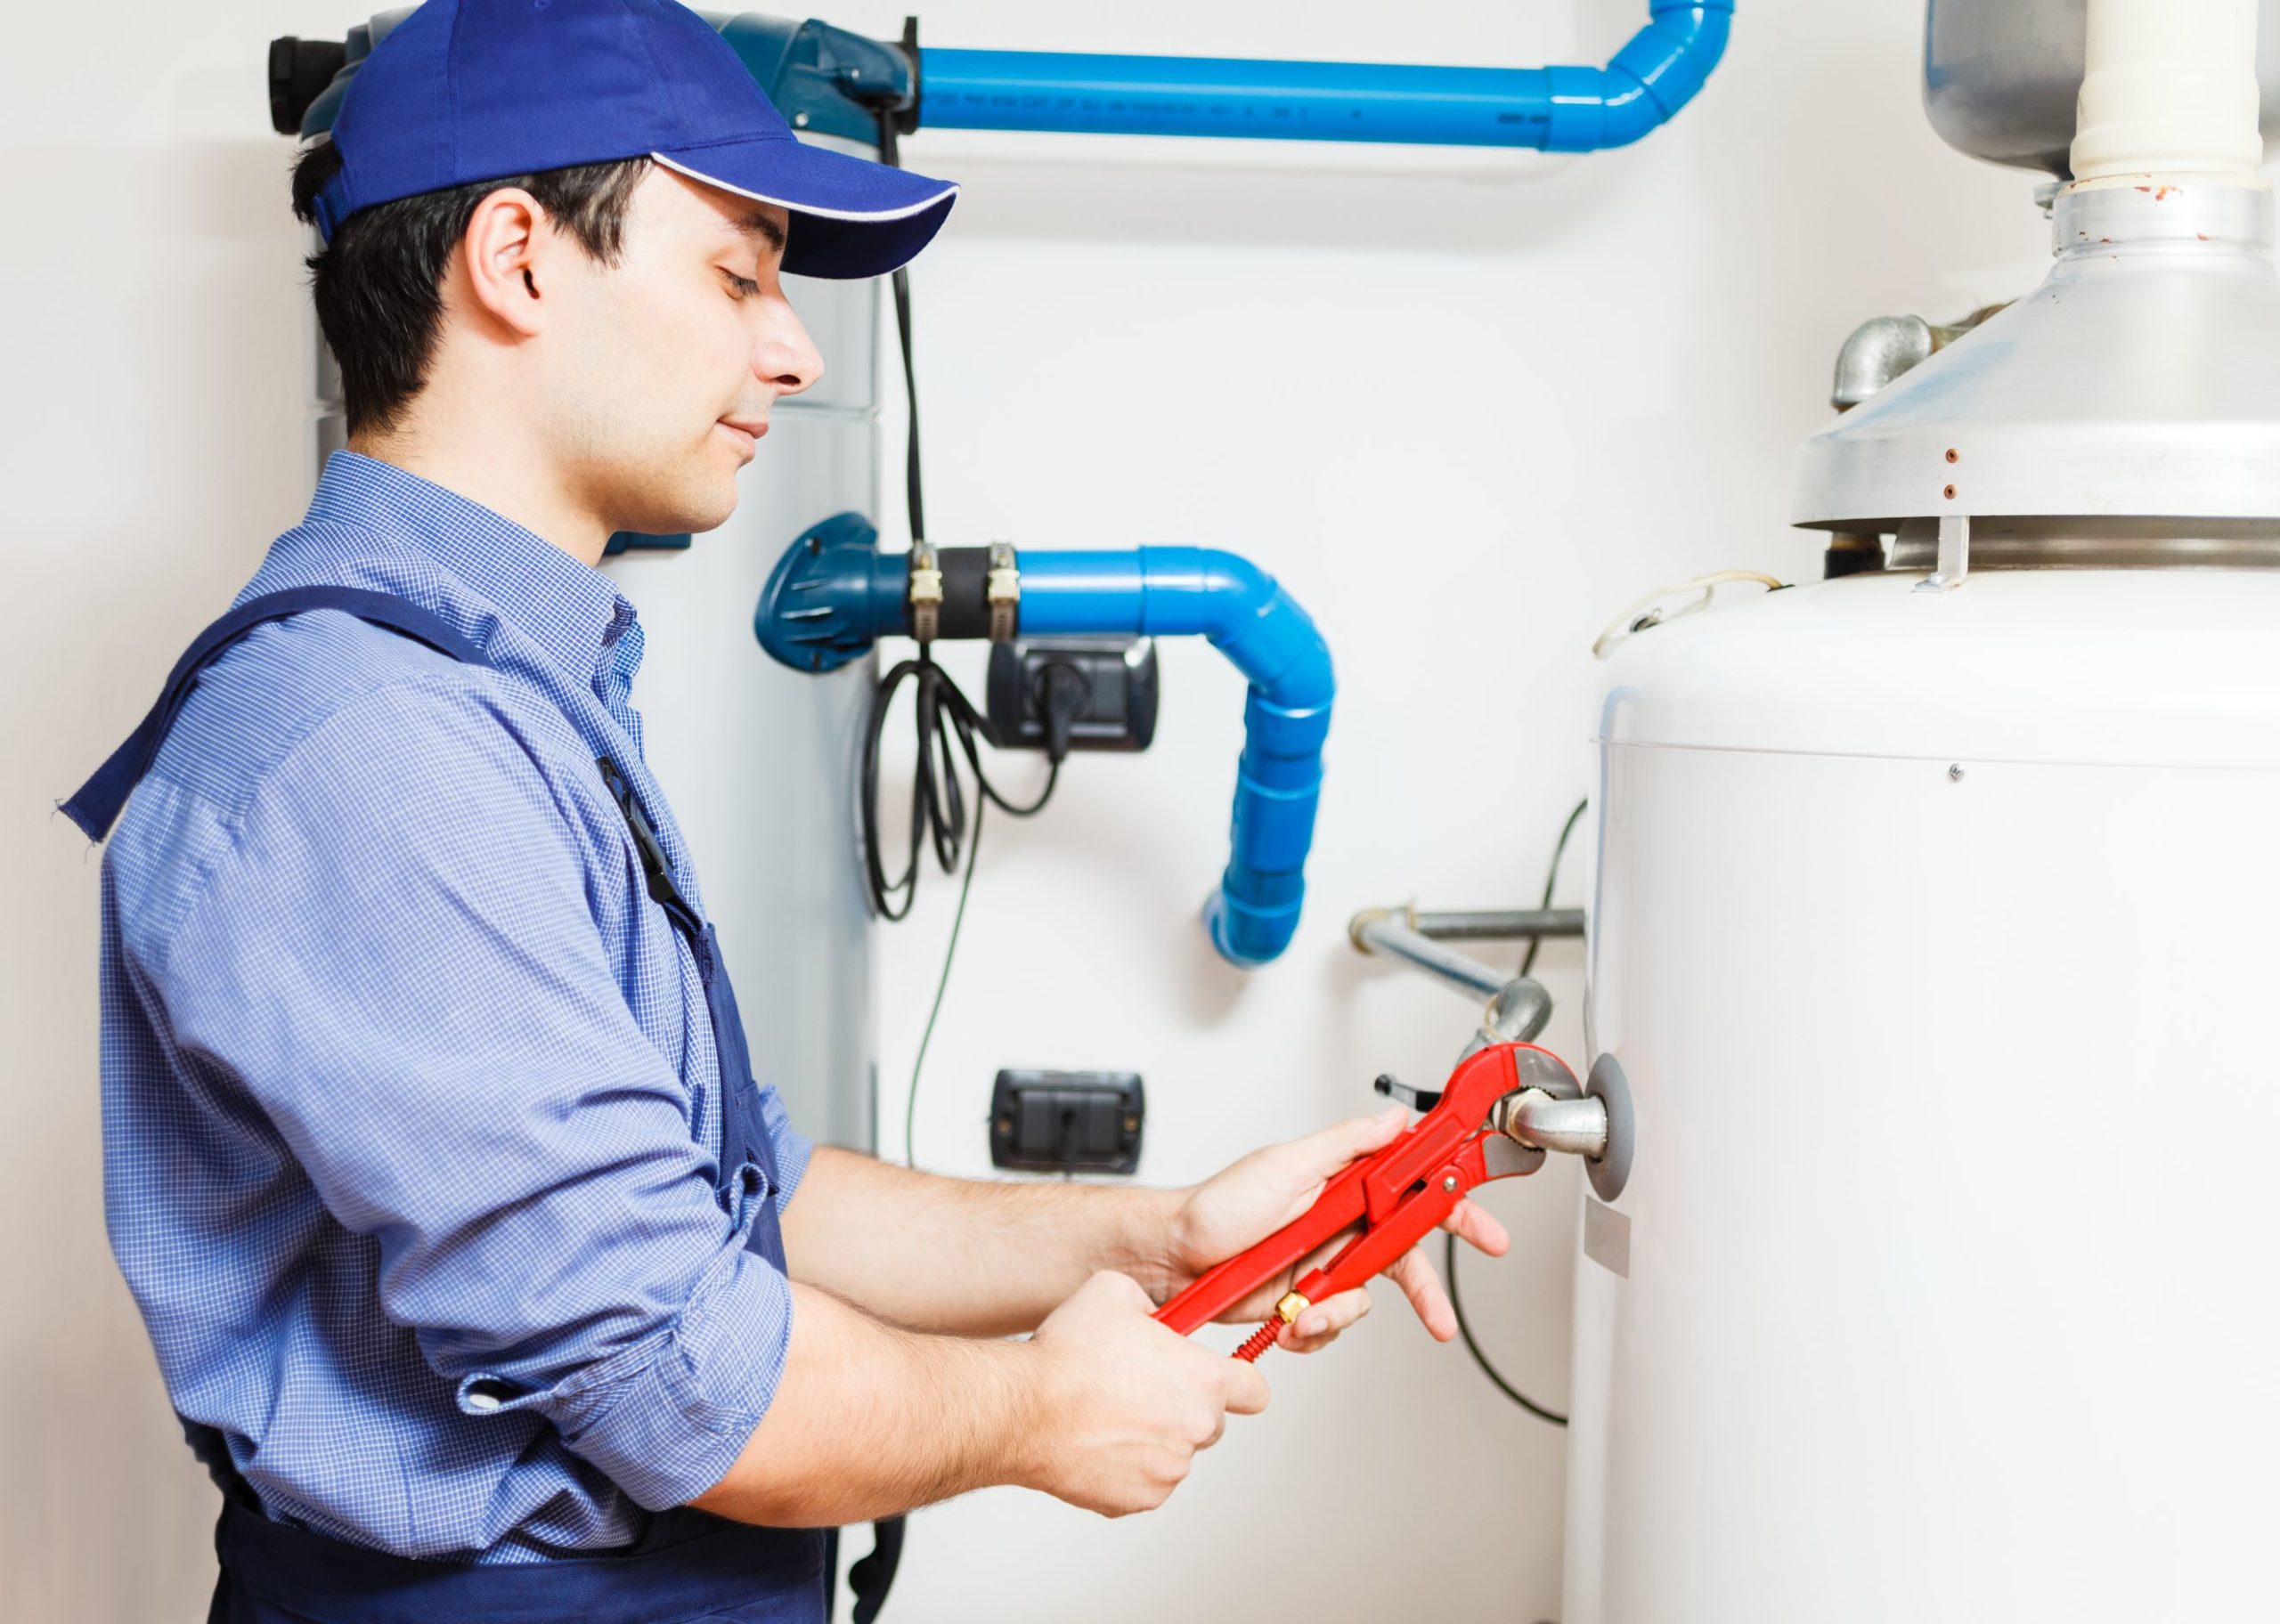 How To Know If Your Hot Water Heater Went Out